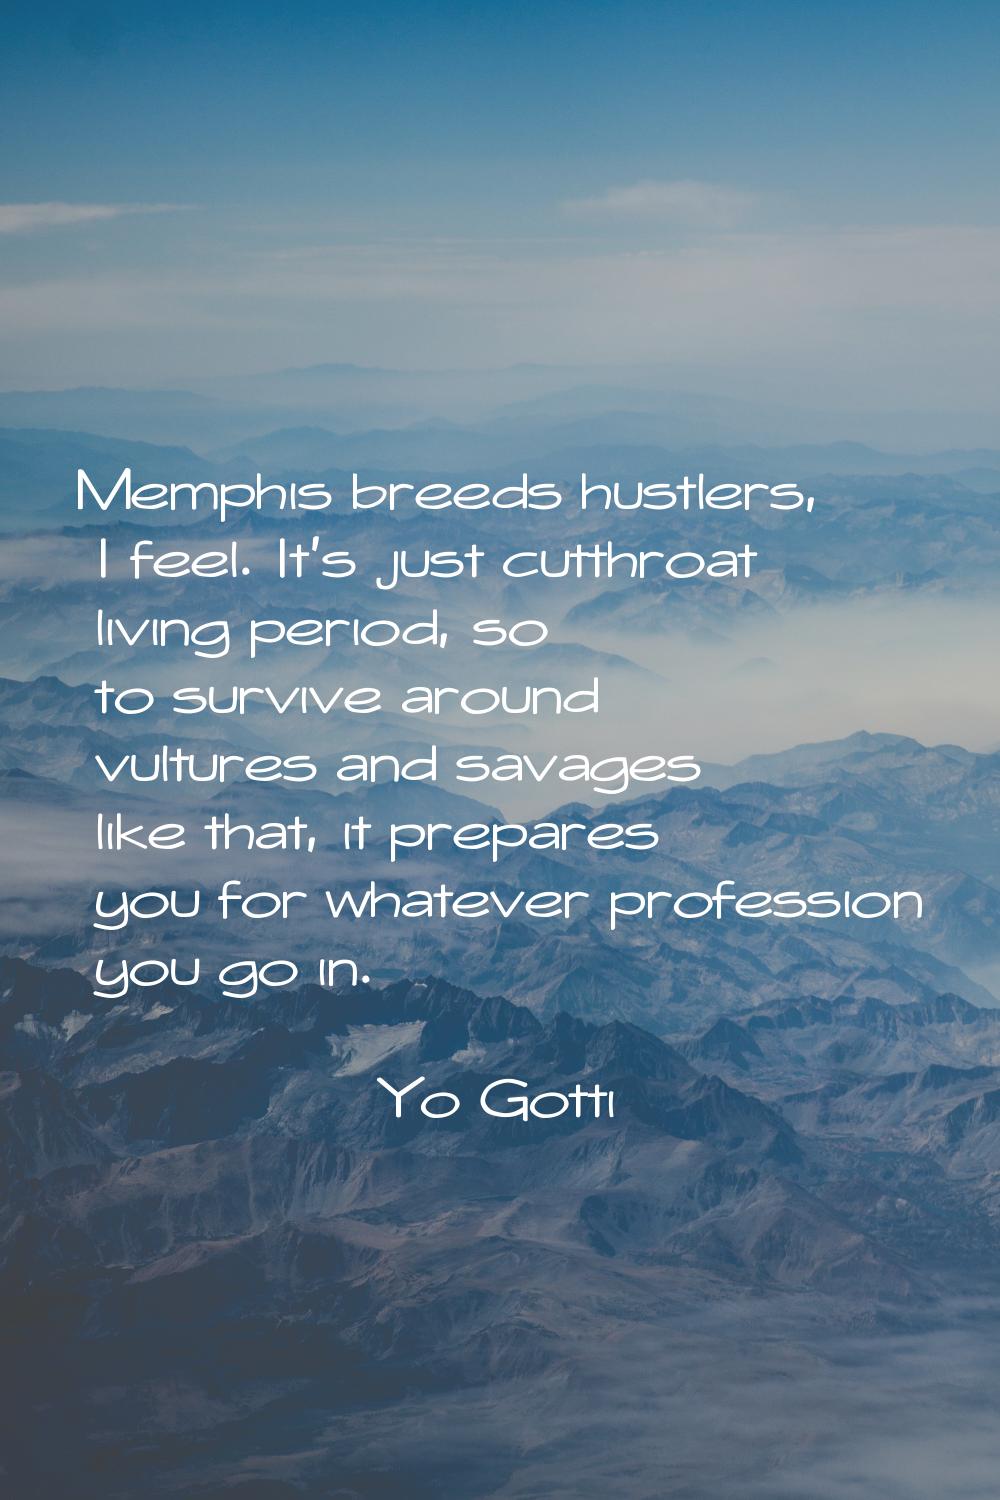 Memphis breeds hustlers, I feel. It's just cutthroat living period, so to survive around vultures a